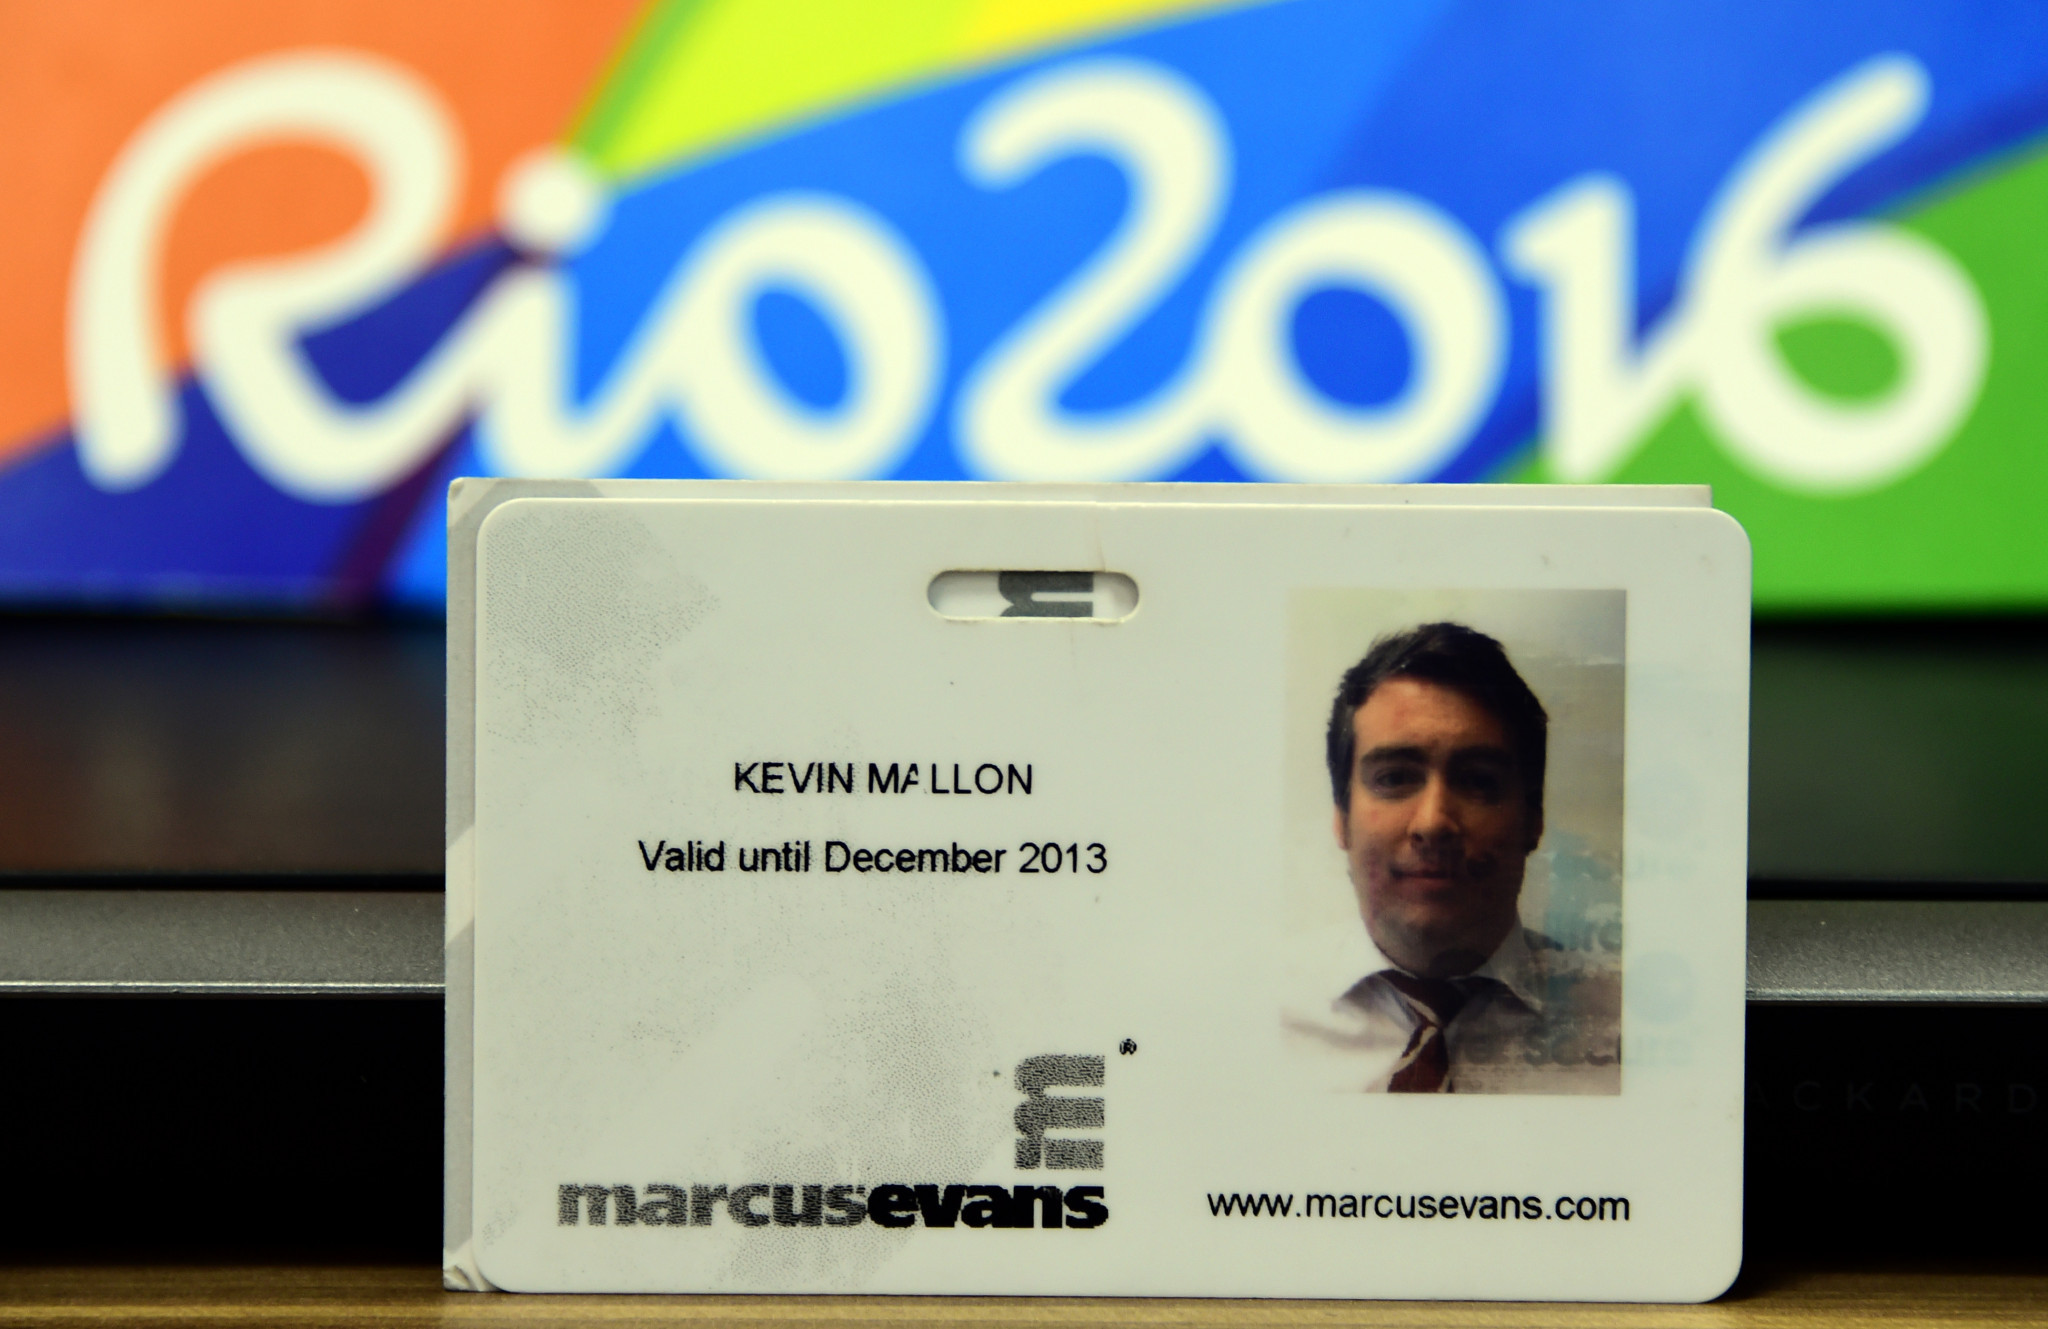 A business ID card belonging to Kevin Mallon of THG Sports ©Getty Images